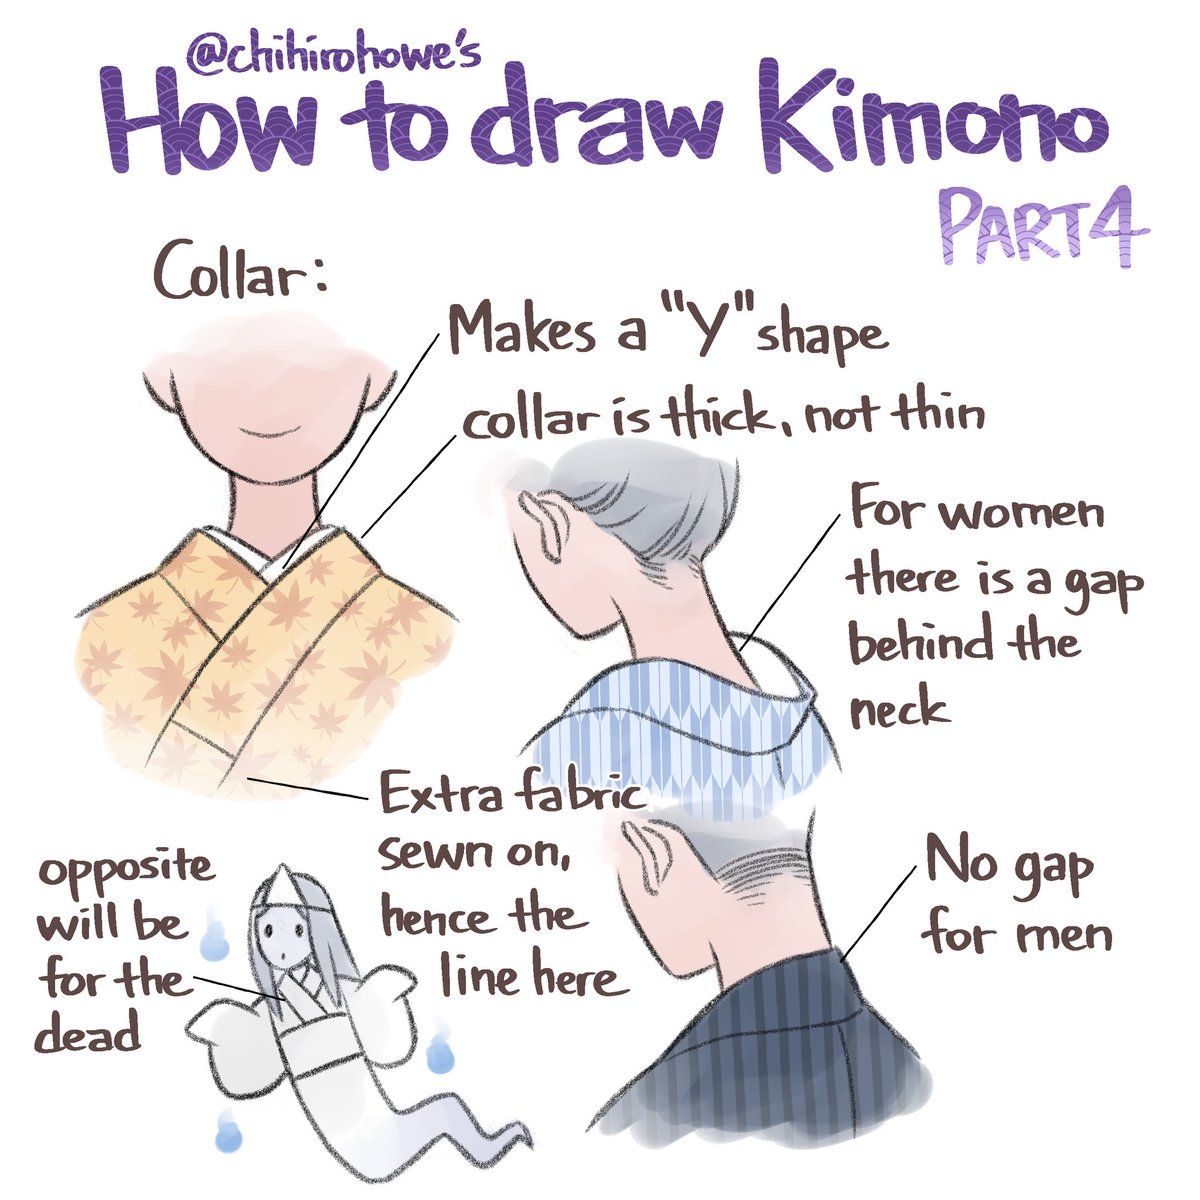  #kimono Part 4: CollarI see this mistake a lot... The kimono collar is ALWAYS left over right, no matter the gender. Right over left is reserved for the dead. Japanese ghosts are drawn with the collar right over left because they are the dead.